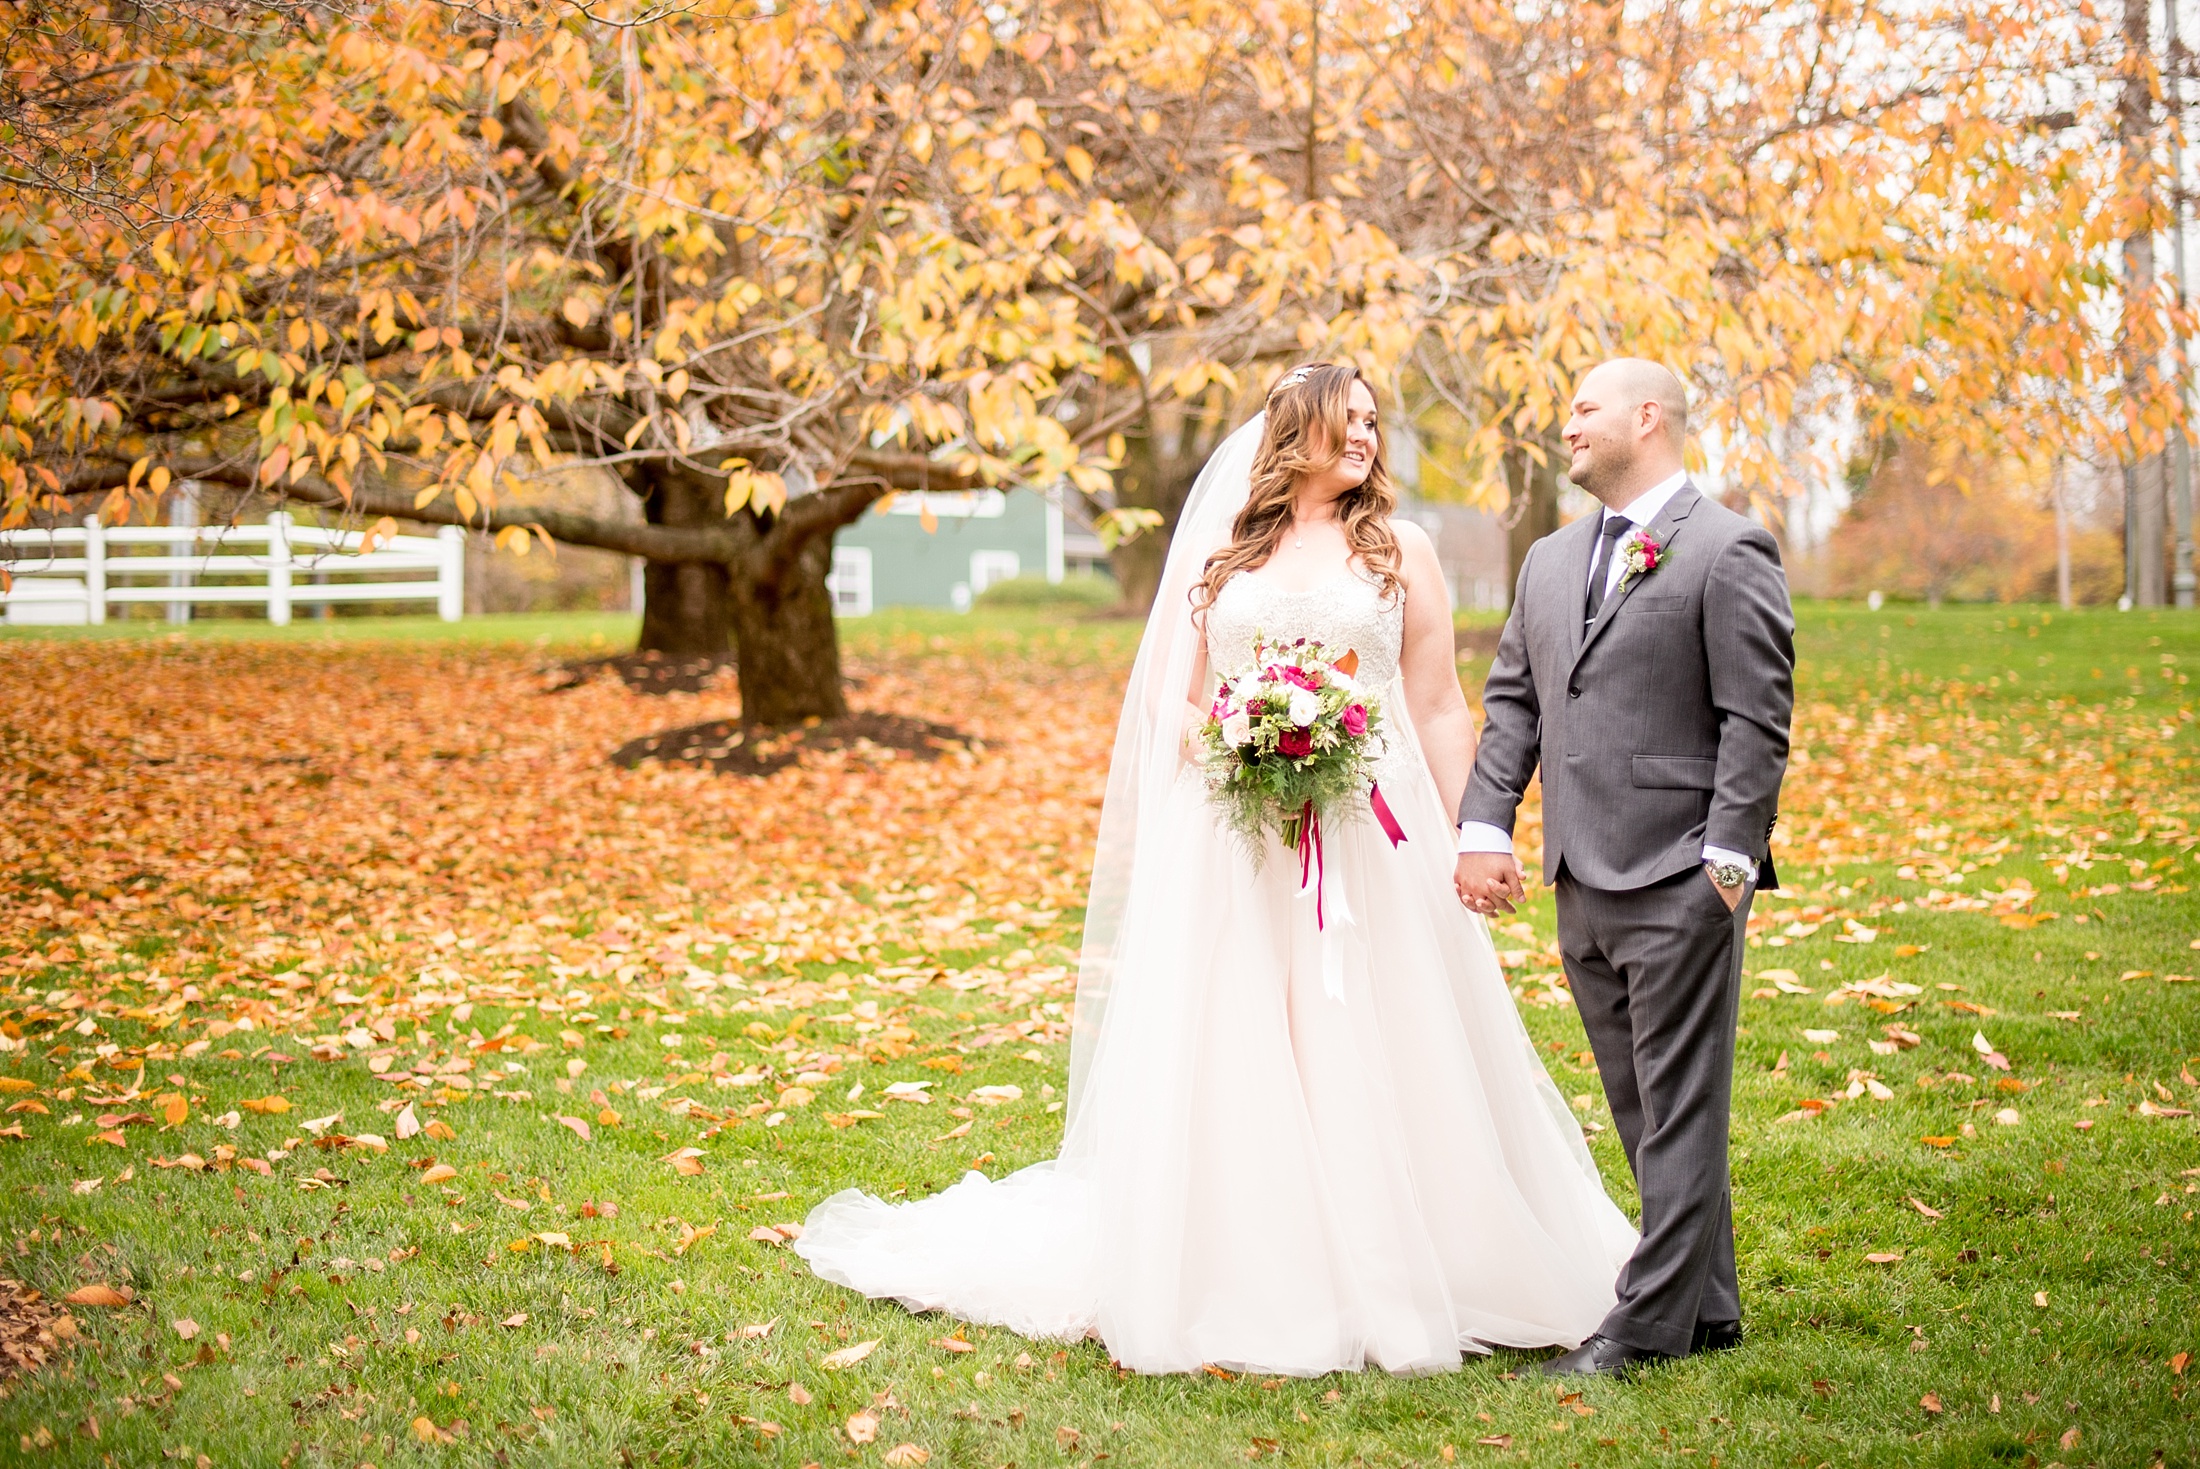 Pros and Cons of a Destination Wedding. Photo in New Jersey for an October wedding.